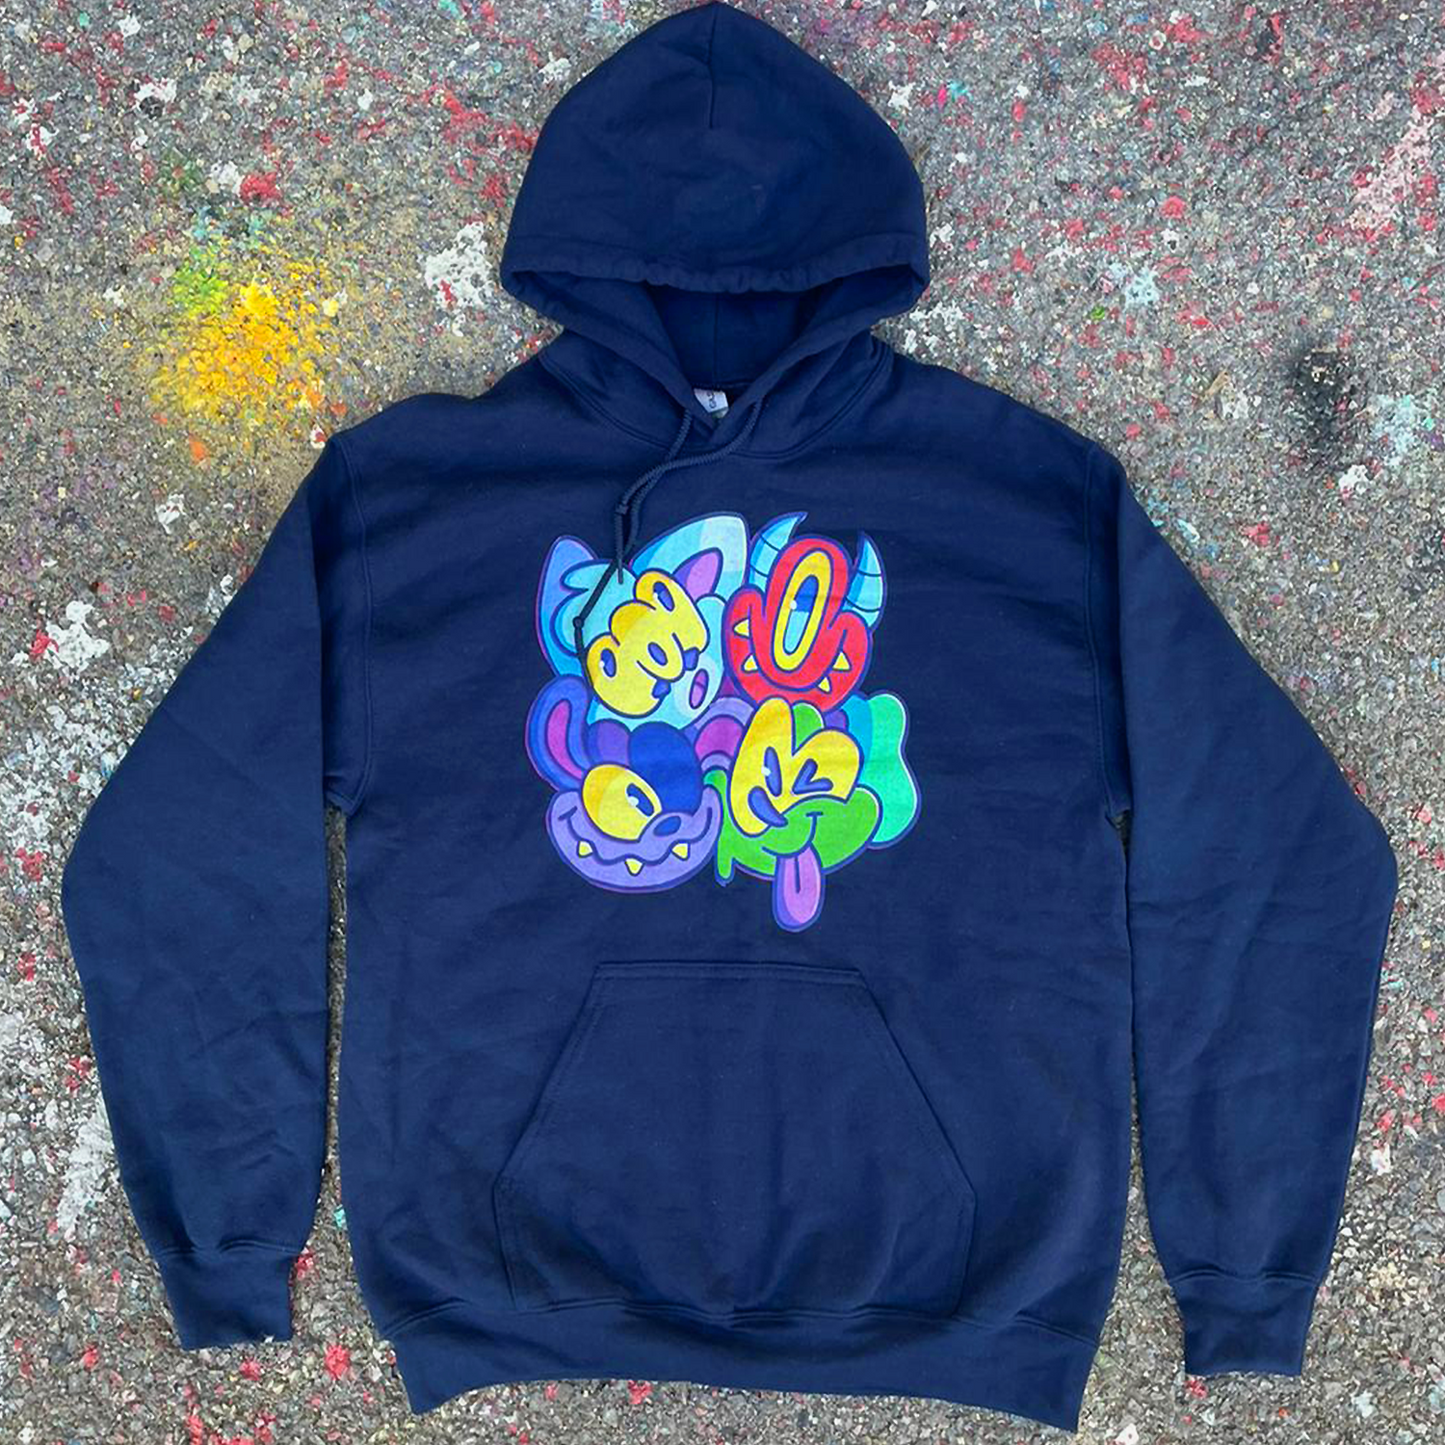 CORKiE hoodie, featuring four cute graffiti characters.